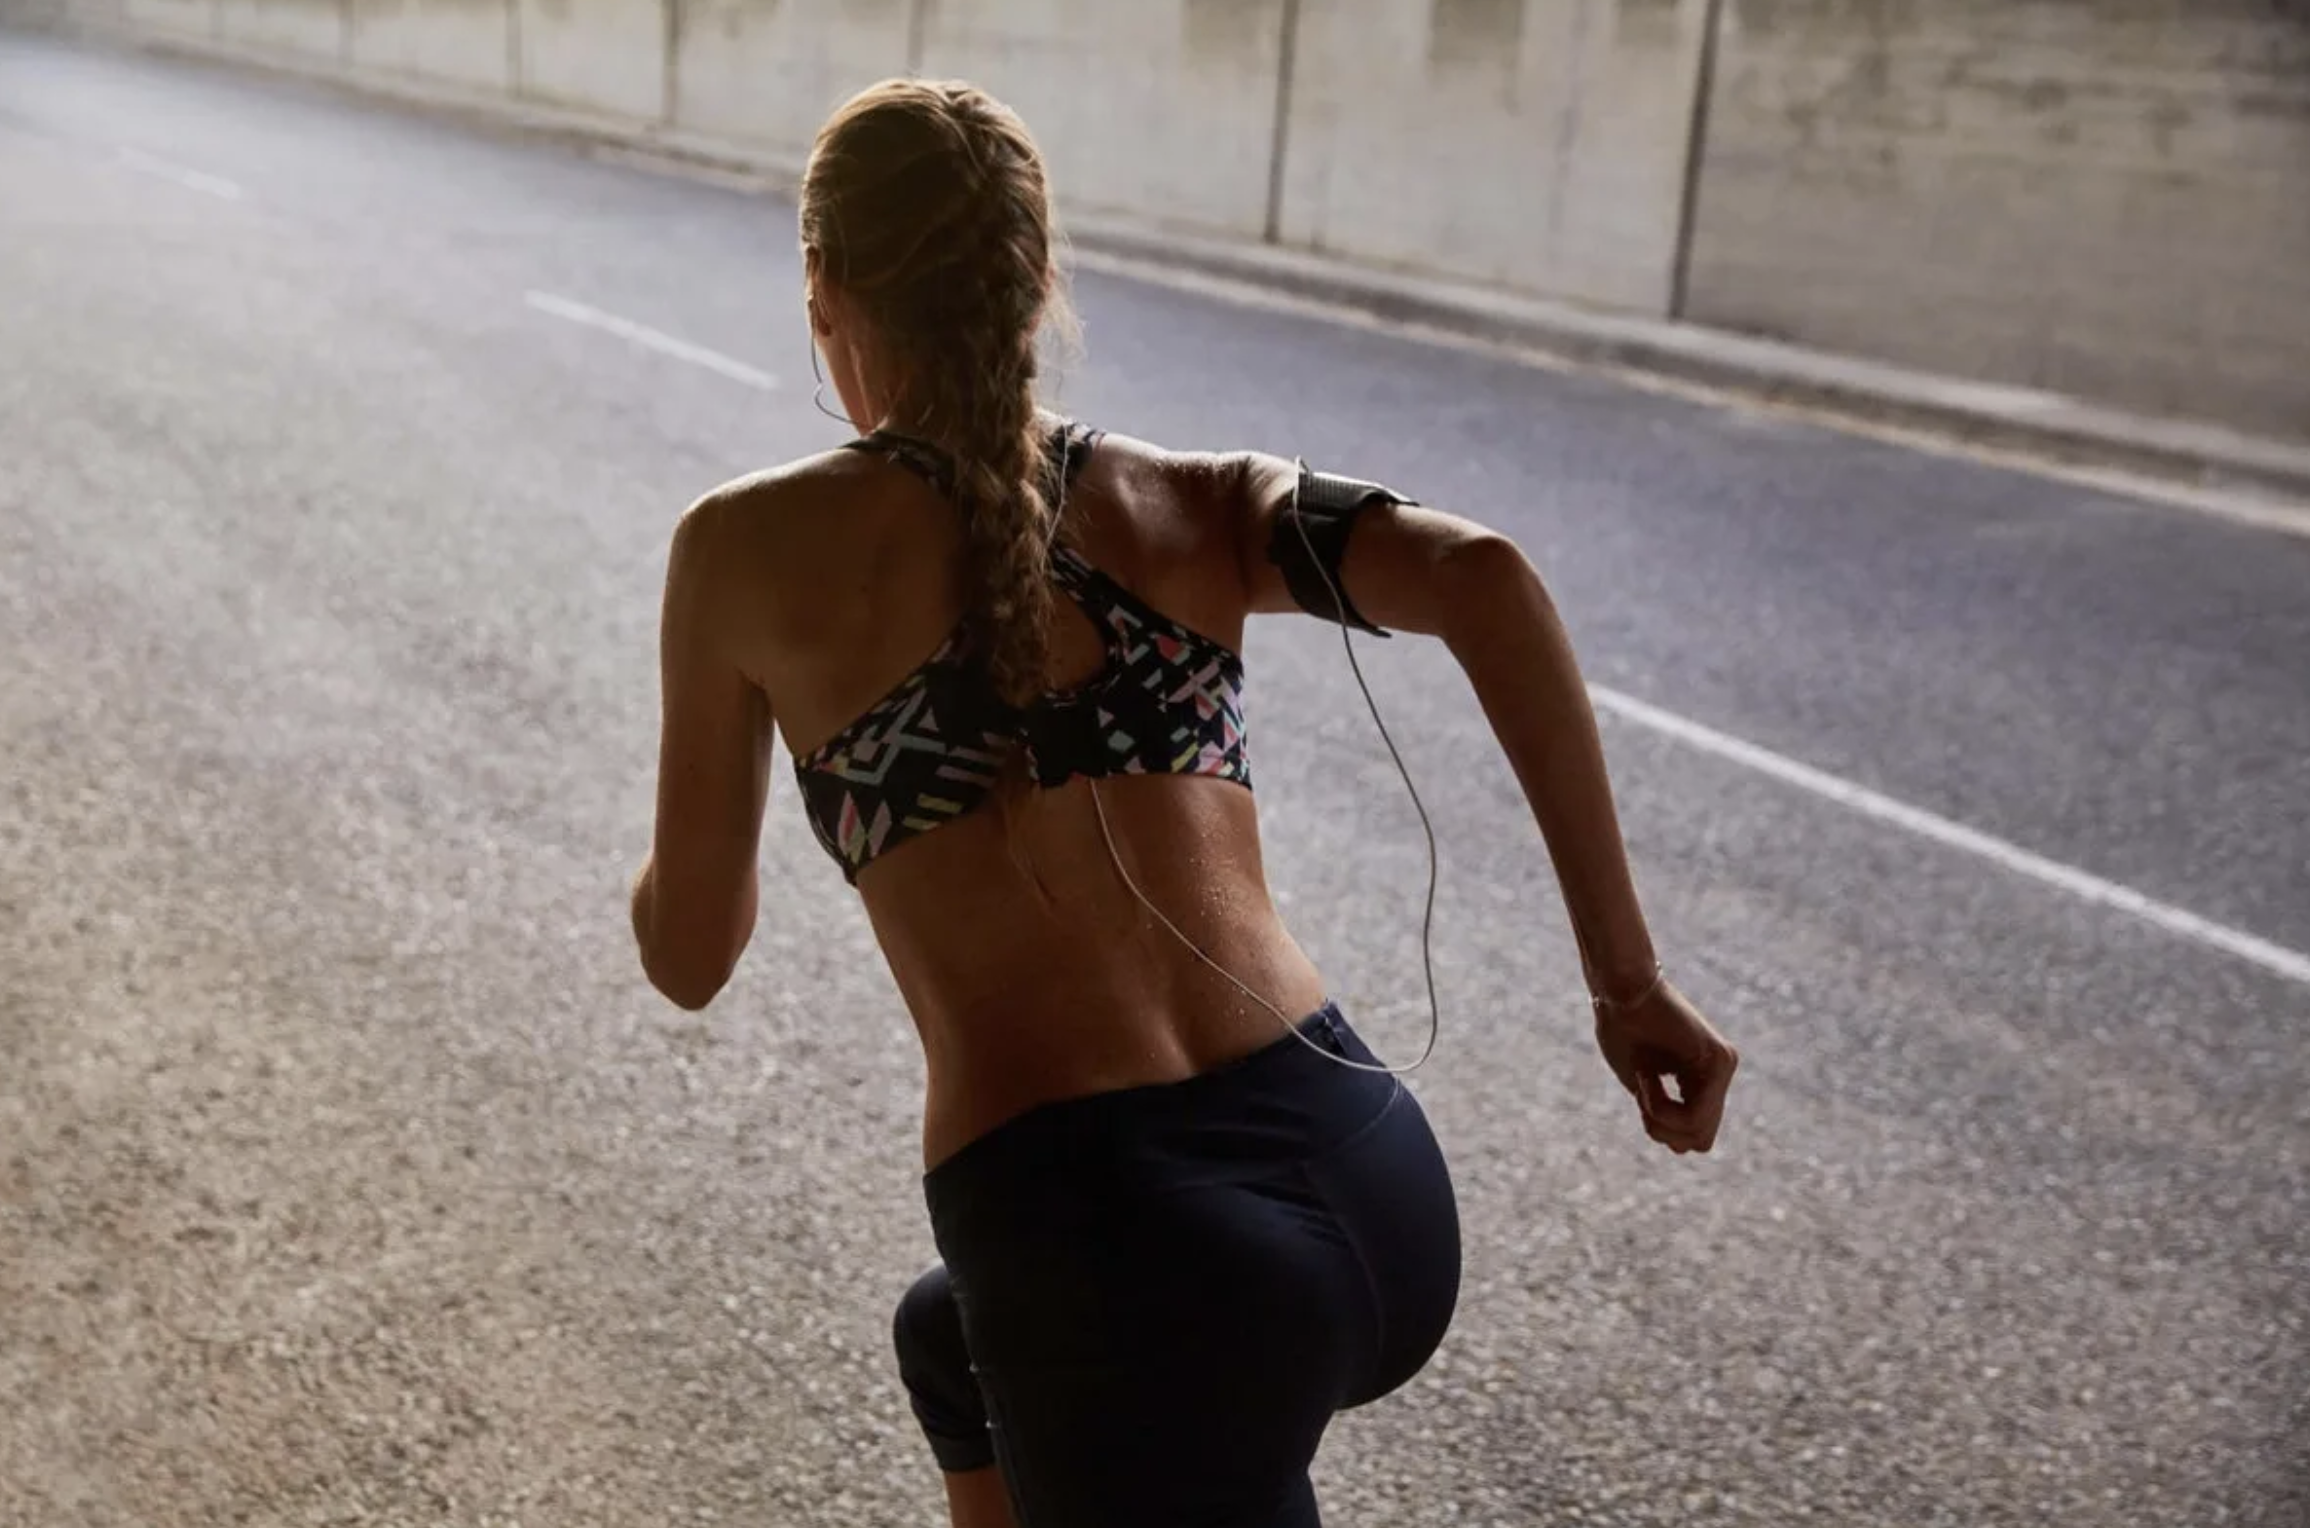 Woman running in a sports bra and shorts